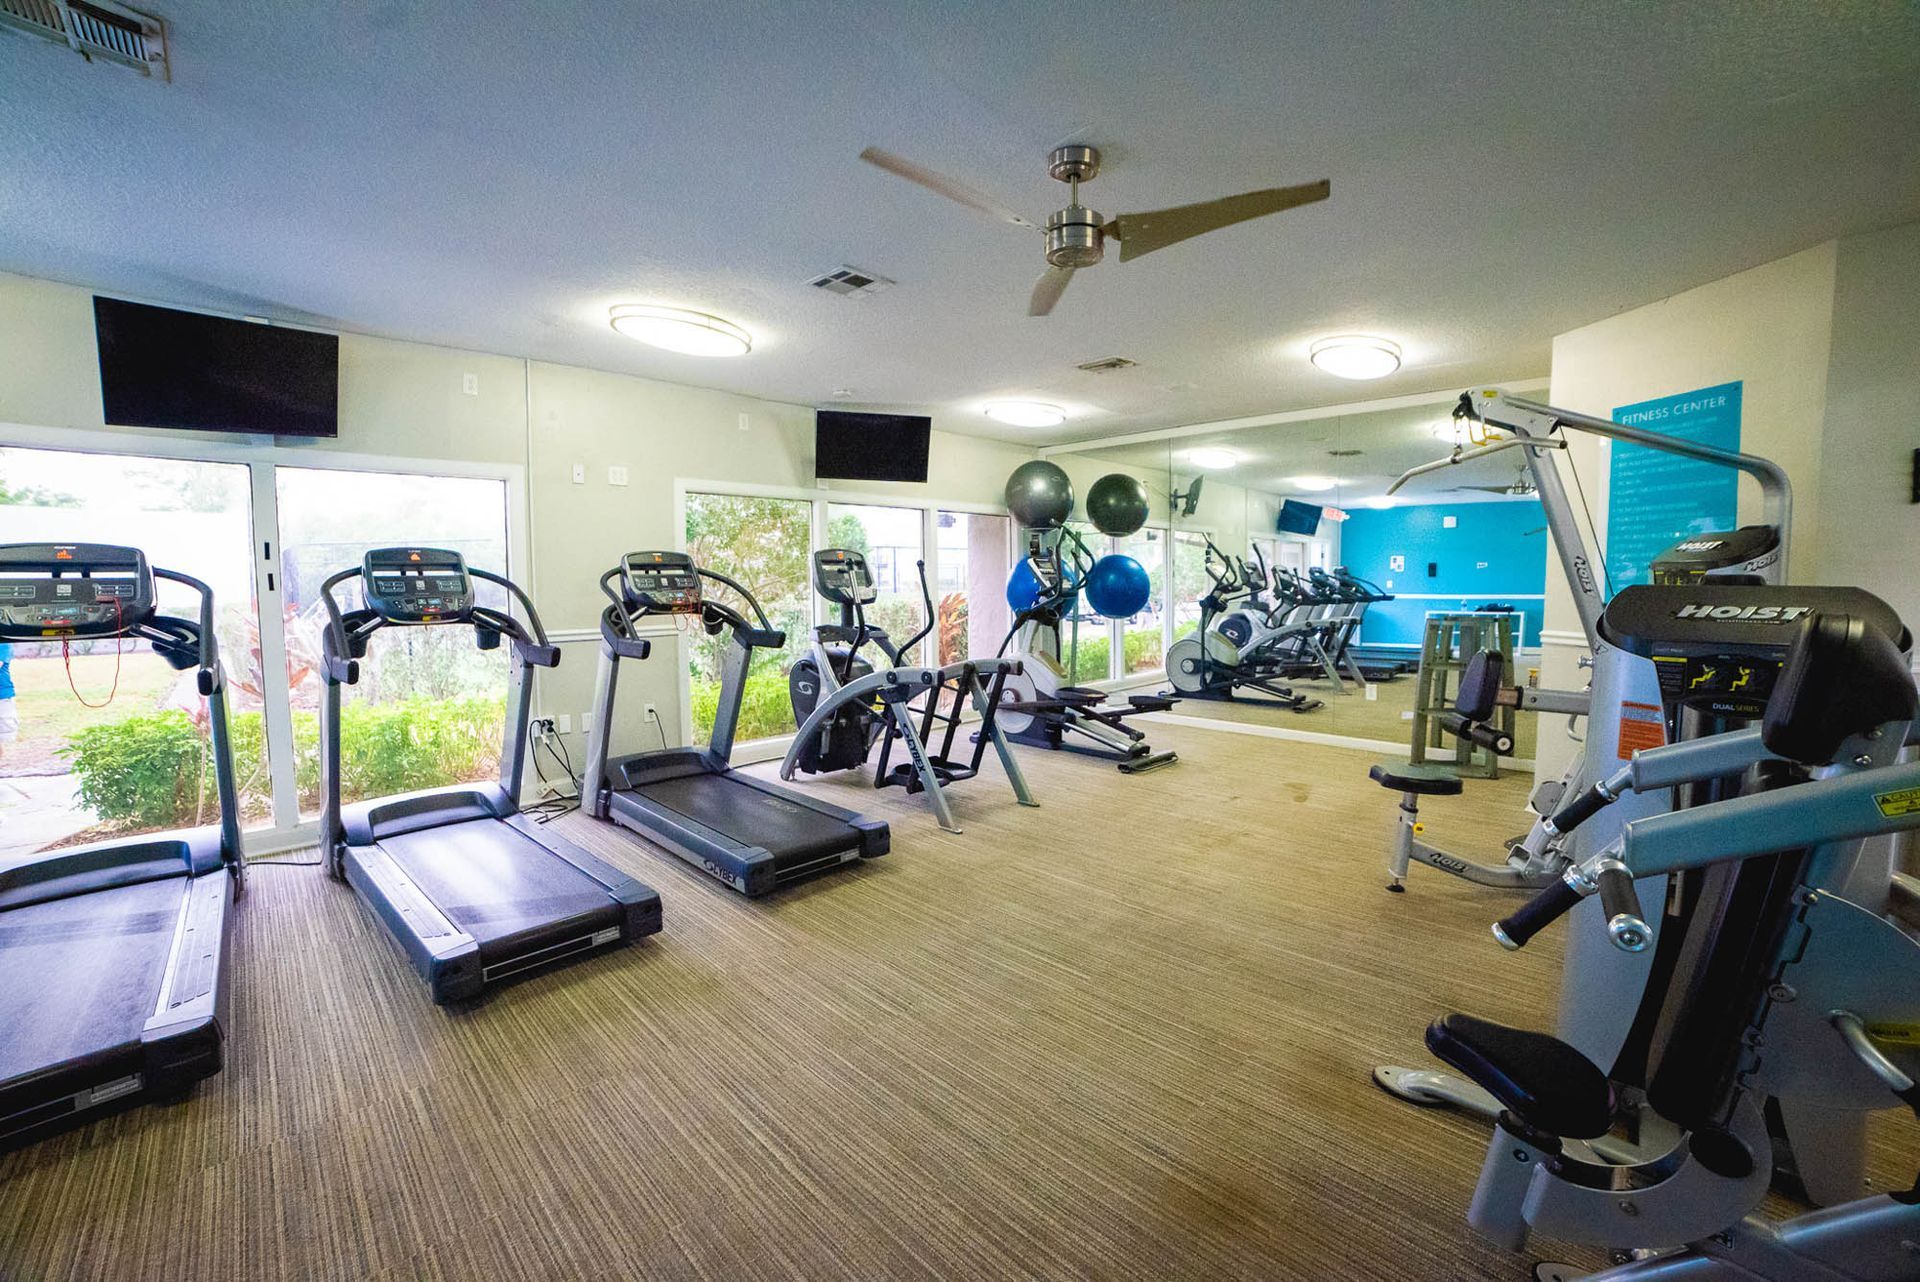 A gym with treadmills , exercise bikes , and a ceiling fan at Trellis at The Lakes.